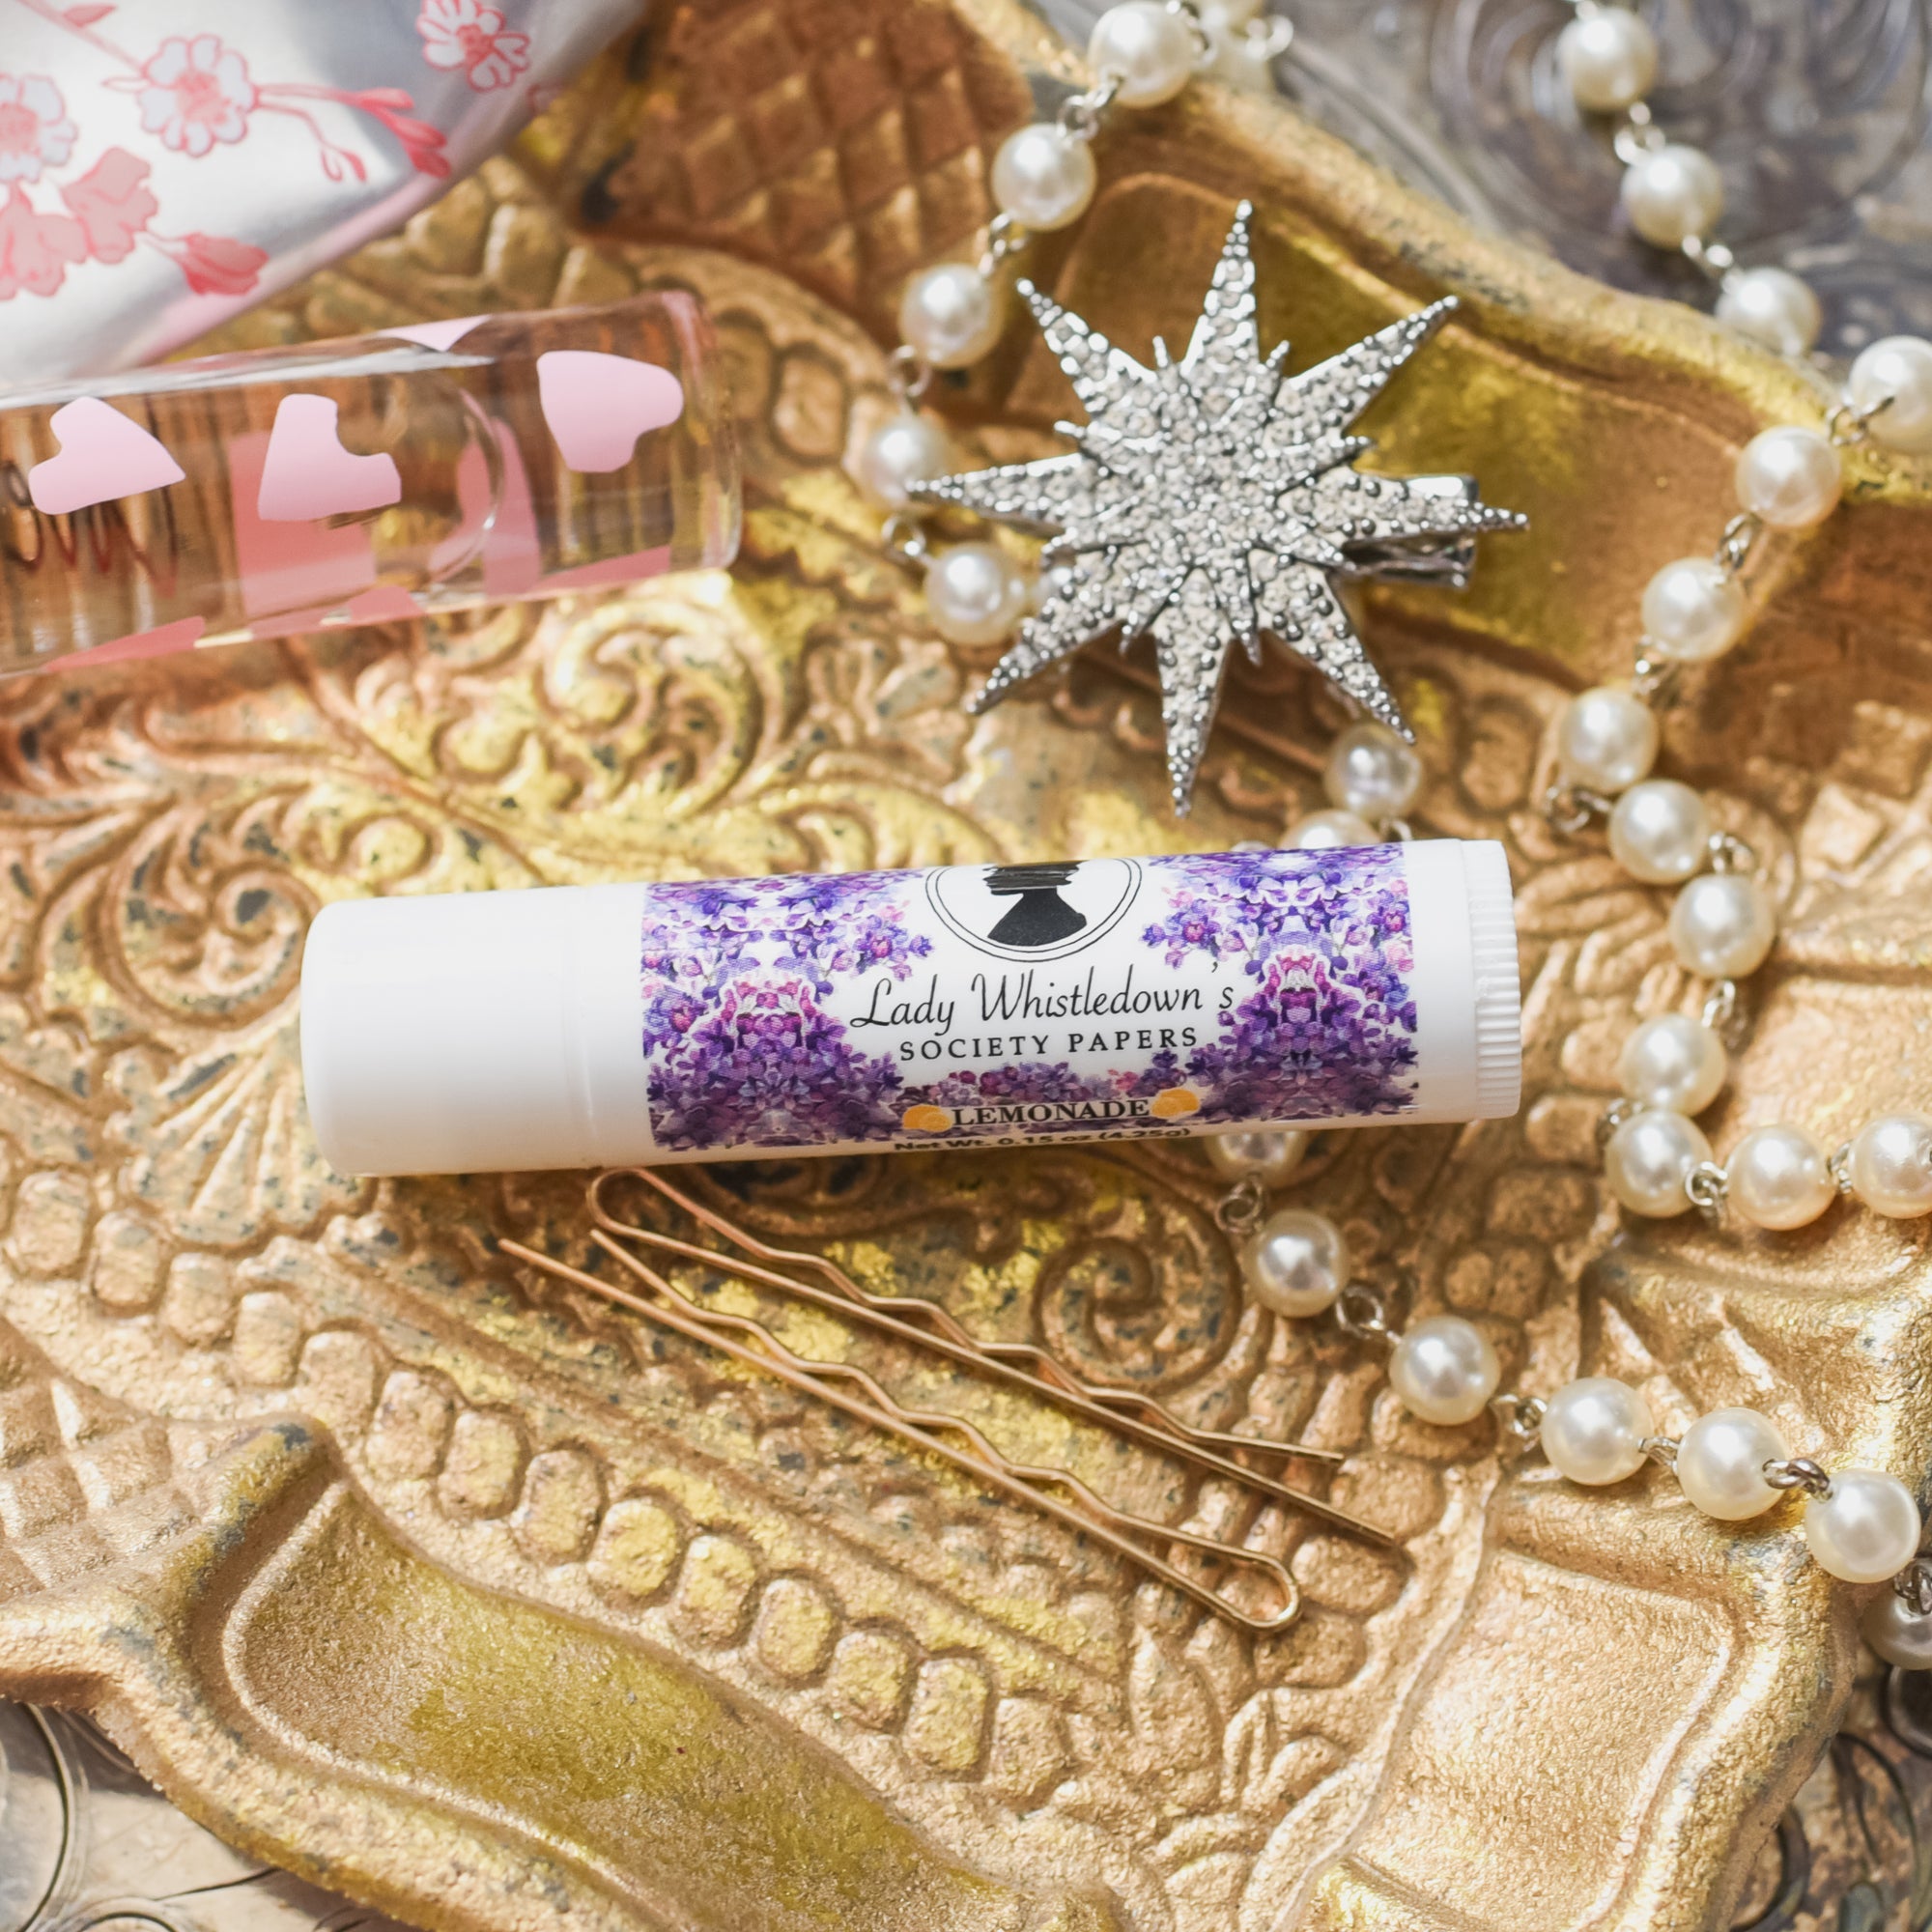 Bridgerton Lip Balm with a silhouette of a woman and printed with purple flowers and a lemonade flavor label on the side.